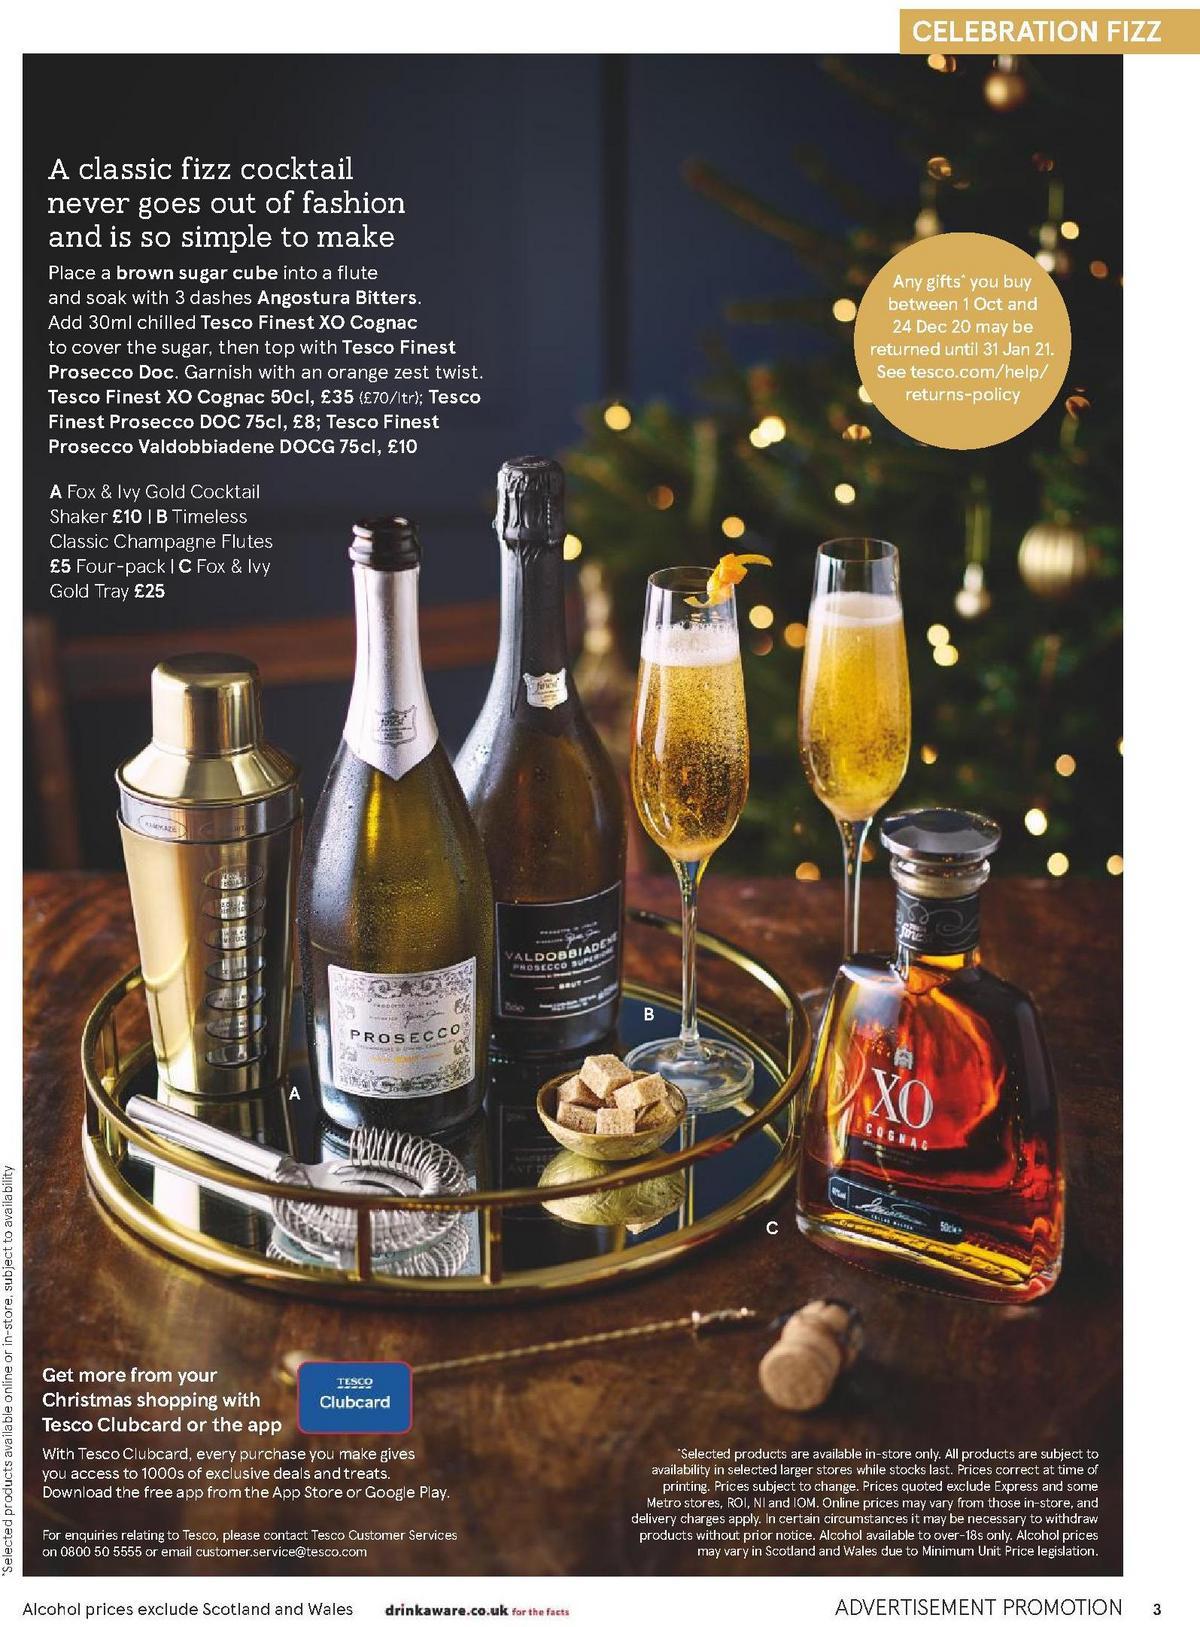 TESCO Christmas at Home Brochure Offers from 1 December